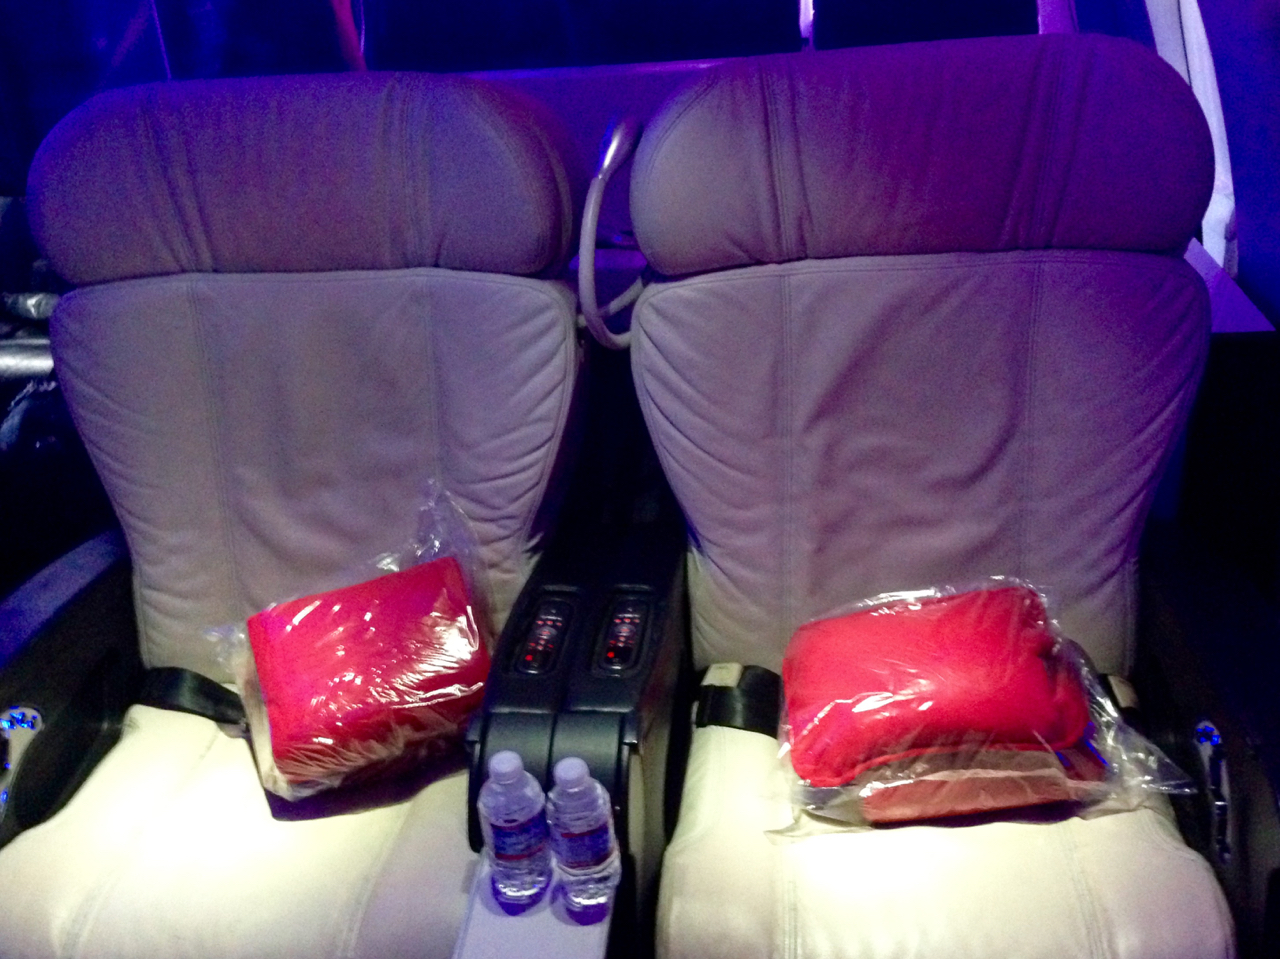 How to Stay 1 Night at a Hyatt and get a Free Virgin America Flight